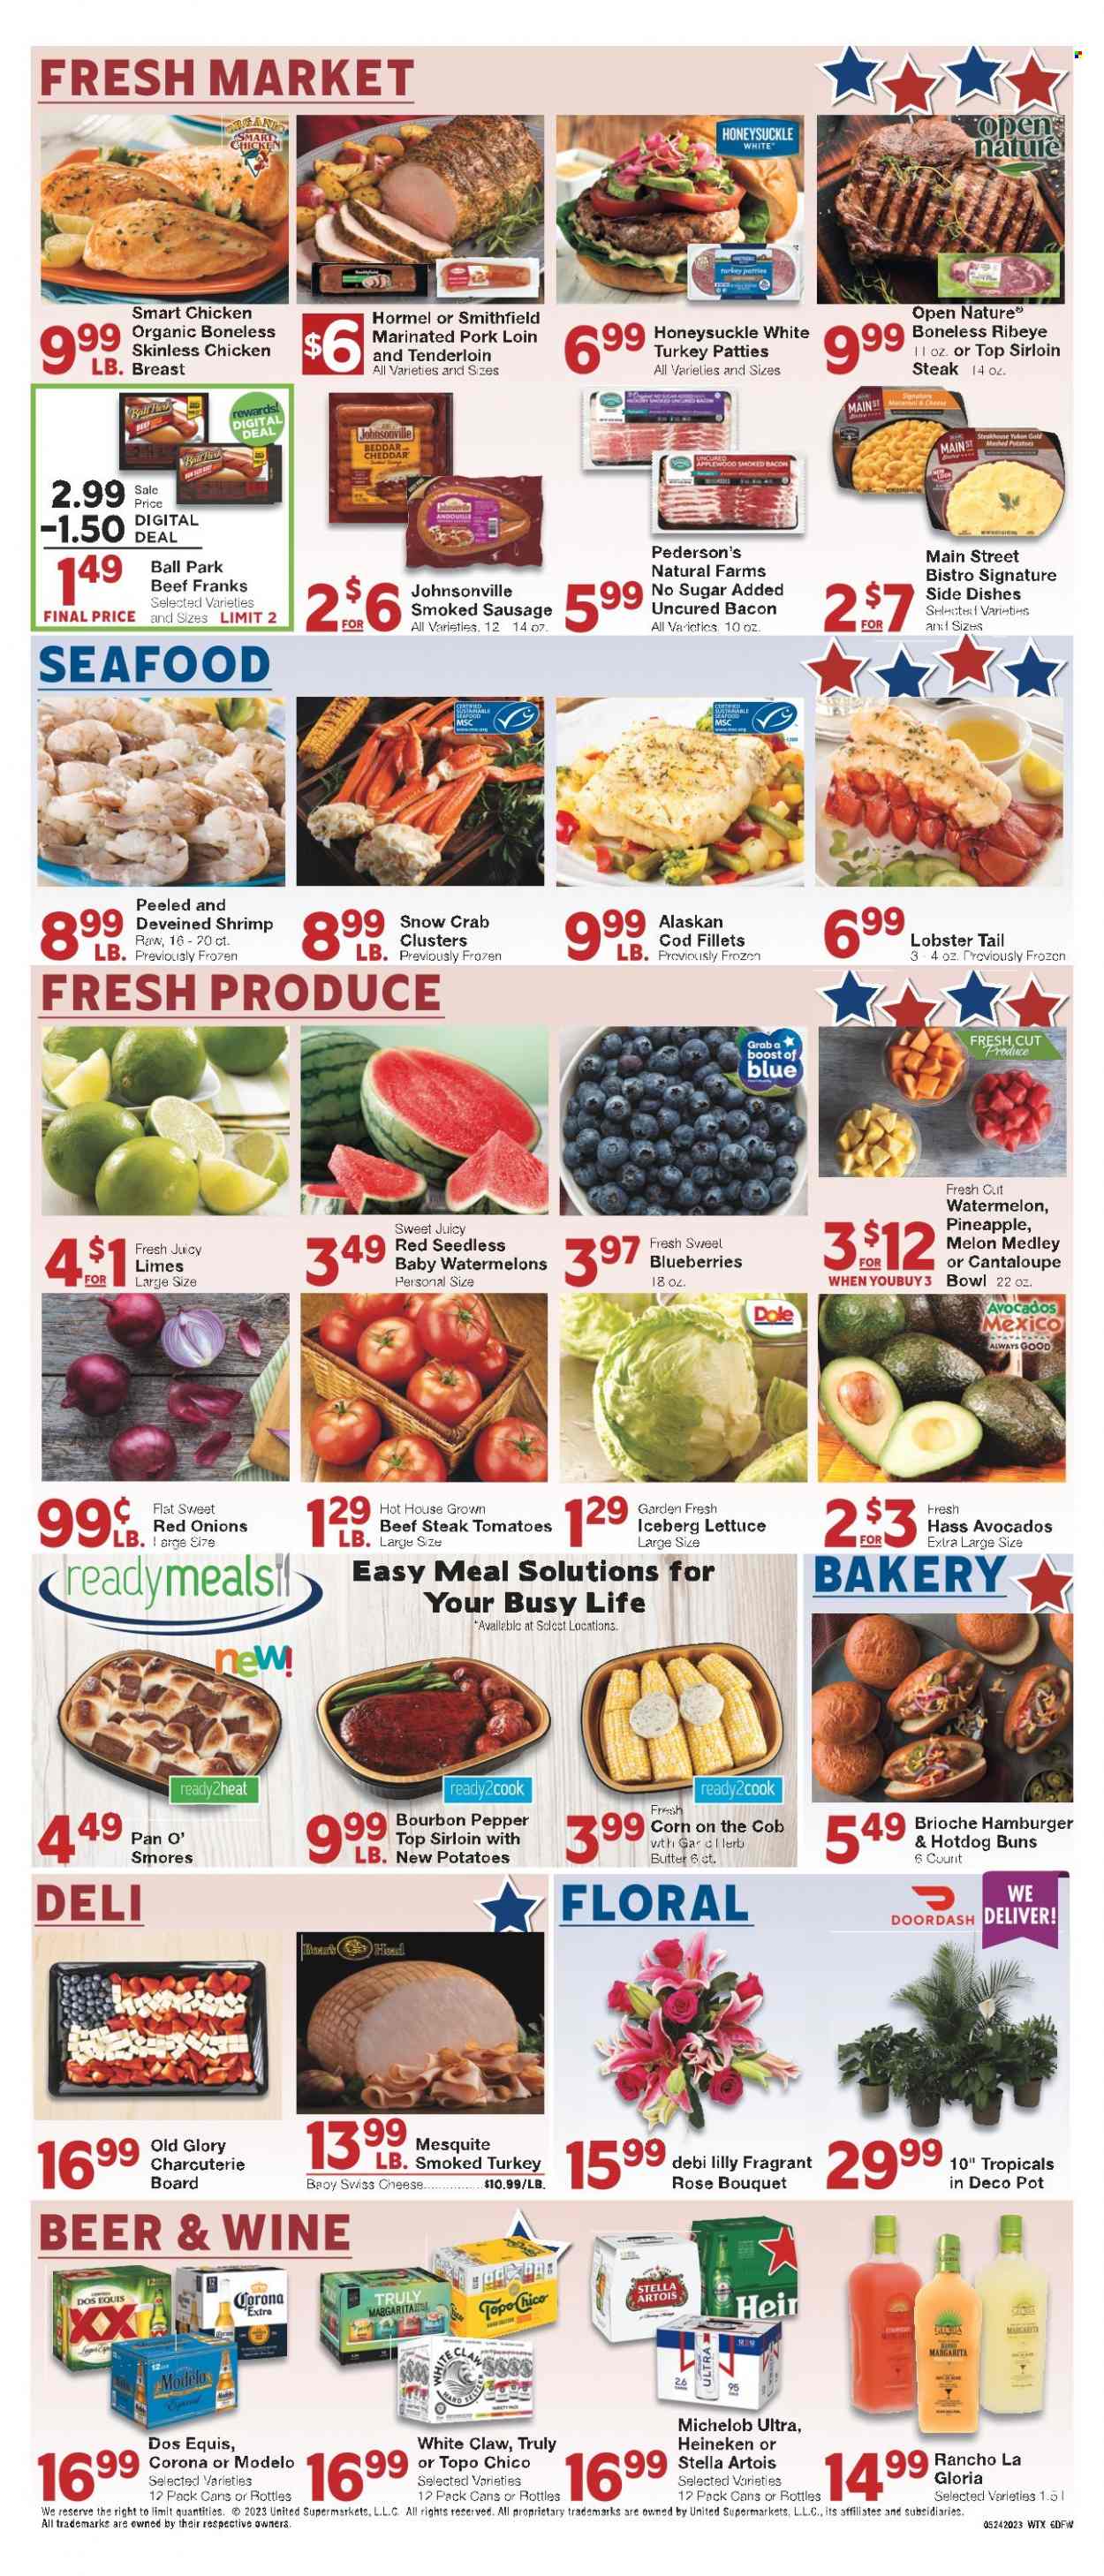 thumbnail - Market Street Flyer - 05/24/2023 - 05/30/2023 - Sales products - hot dog rolls, buns, brioche, corn, red onions, onion, avocado, blueberries, limes, watermelon, pineapple, cod, lobster, seafood, crab, lobster tail, shrimps, crab clusters, mashed potatoes, hamburger, Hormel, bacon, Johnsonville, sausage, smoked sausage, frankfurters, swiss cheese, cheddar, cheese, sparkling water, Boost, wine, alcohol, bourbon, White Claw, TRULY, beer, Stella Artois, Corona Extra, Heineken, Lager, Modelo, Topo Chico, chicken, turkey, beef meat, beef sirloin, beef steak, steak, sirloin steak, pork loin, pork meat, marinated pork, pan, bowl, bouquet, melons, Dos Equis, Michelob. Page 6.